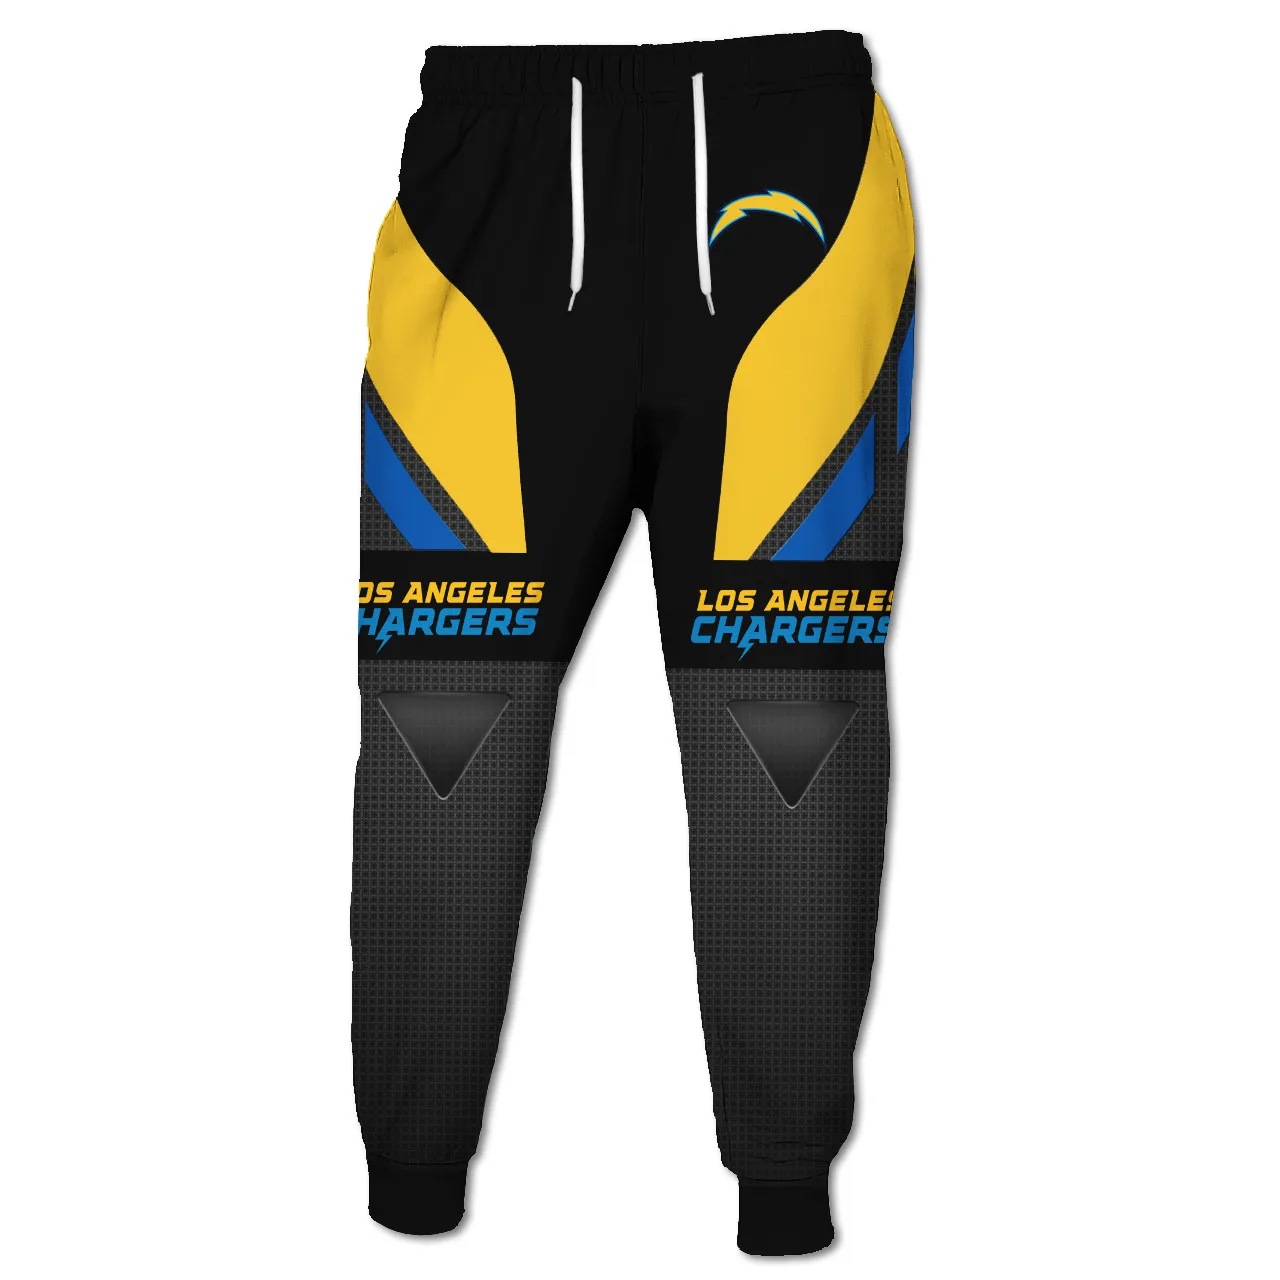 grey sweatpants Los Angeles Yellow and blue stitching chargers red eye skull hip hop sweatpants gym joggers Sweatpants